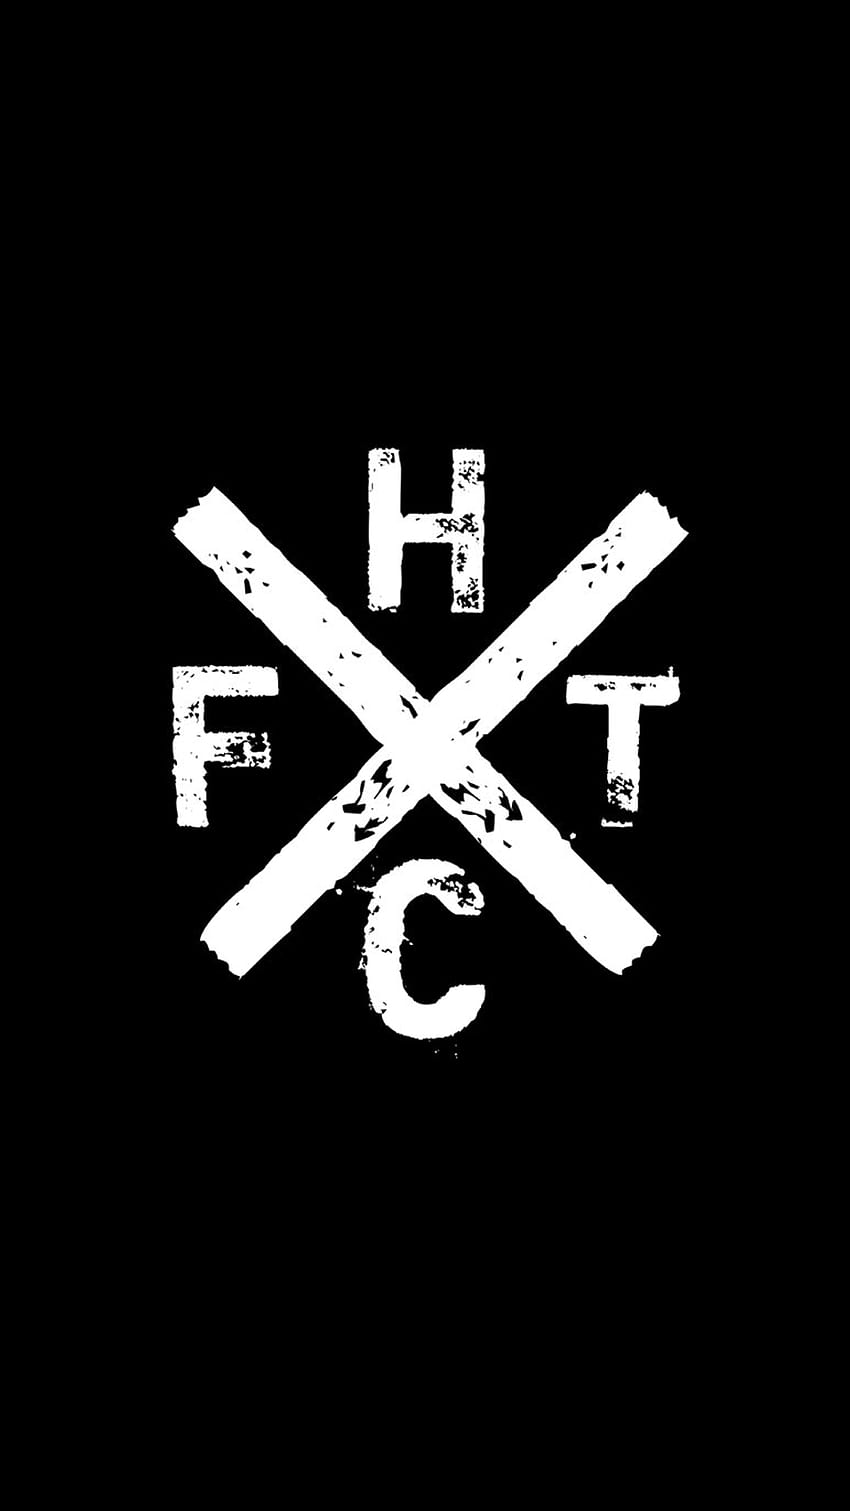 Disturbed by the lack of nice and simple Frank Turner phone , I whipped this up real quick for myself and thought I'd share with you all as well : r/frankturner HD phone wallpaper